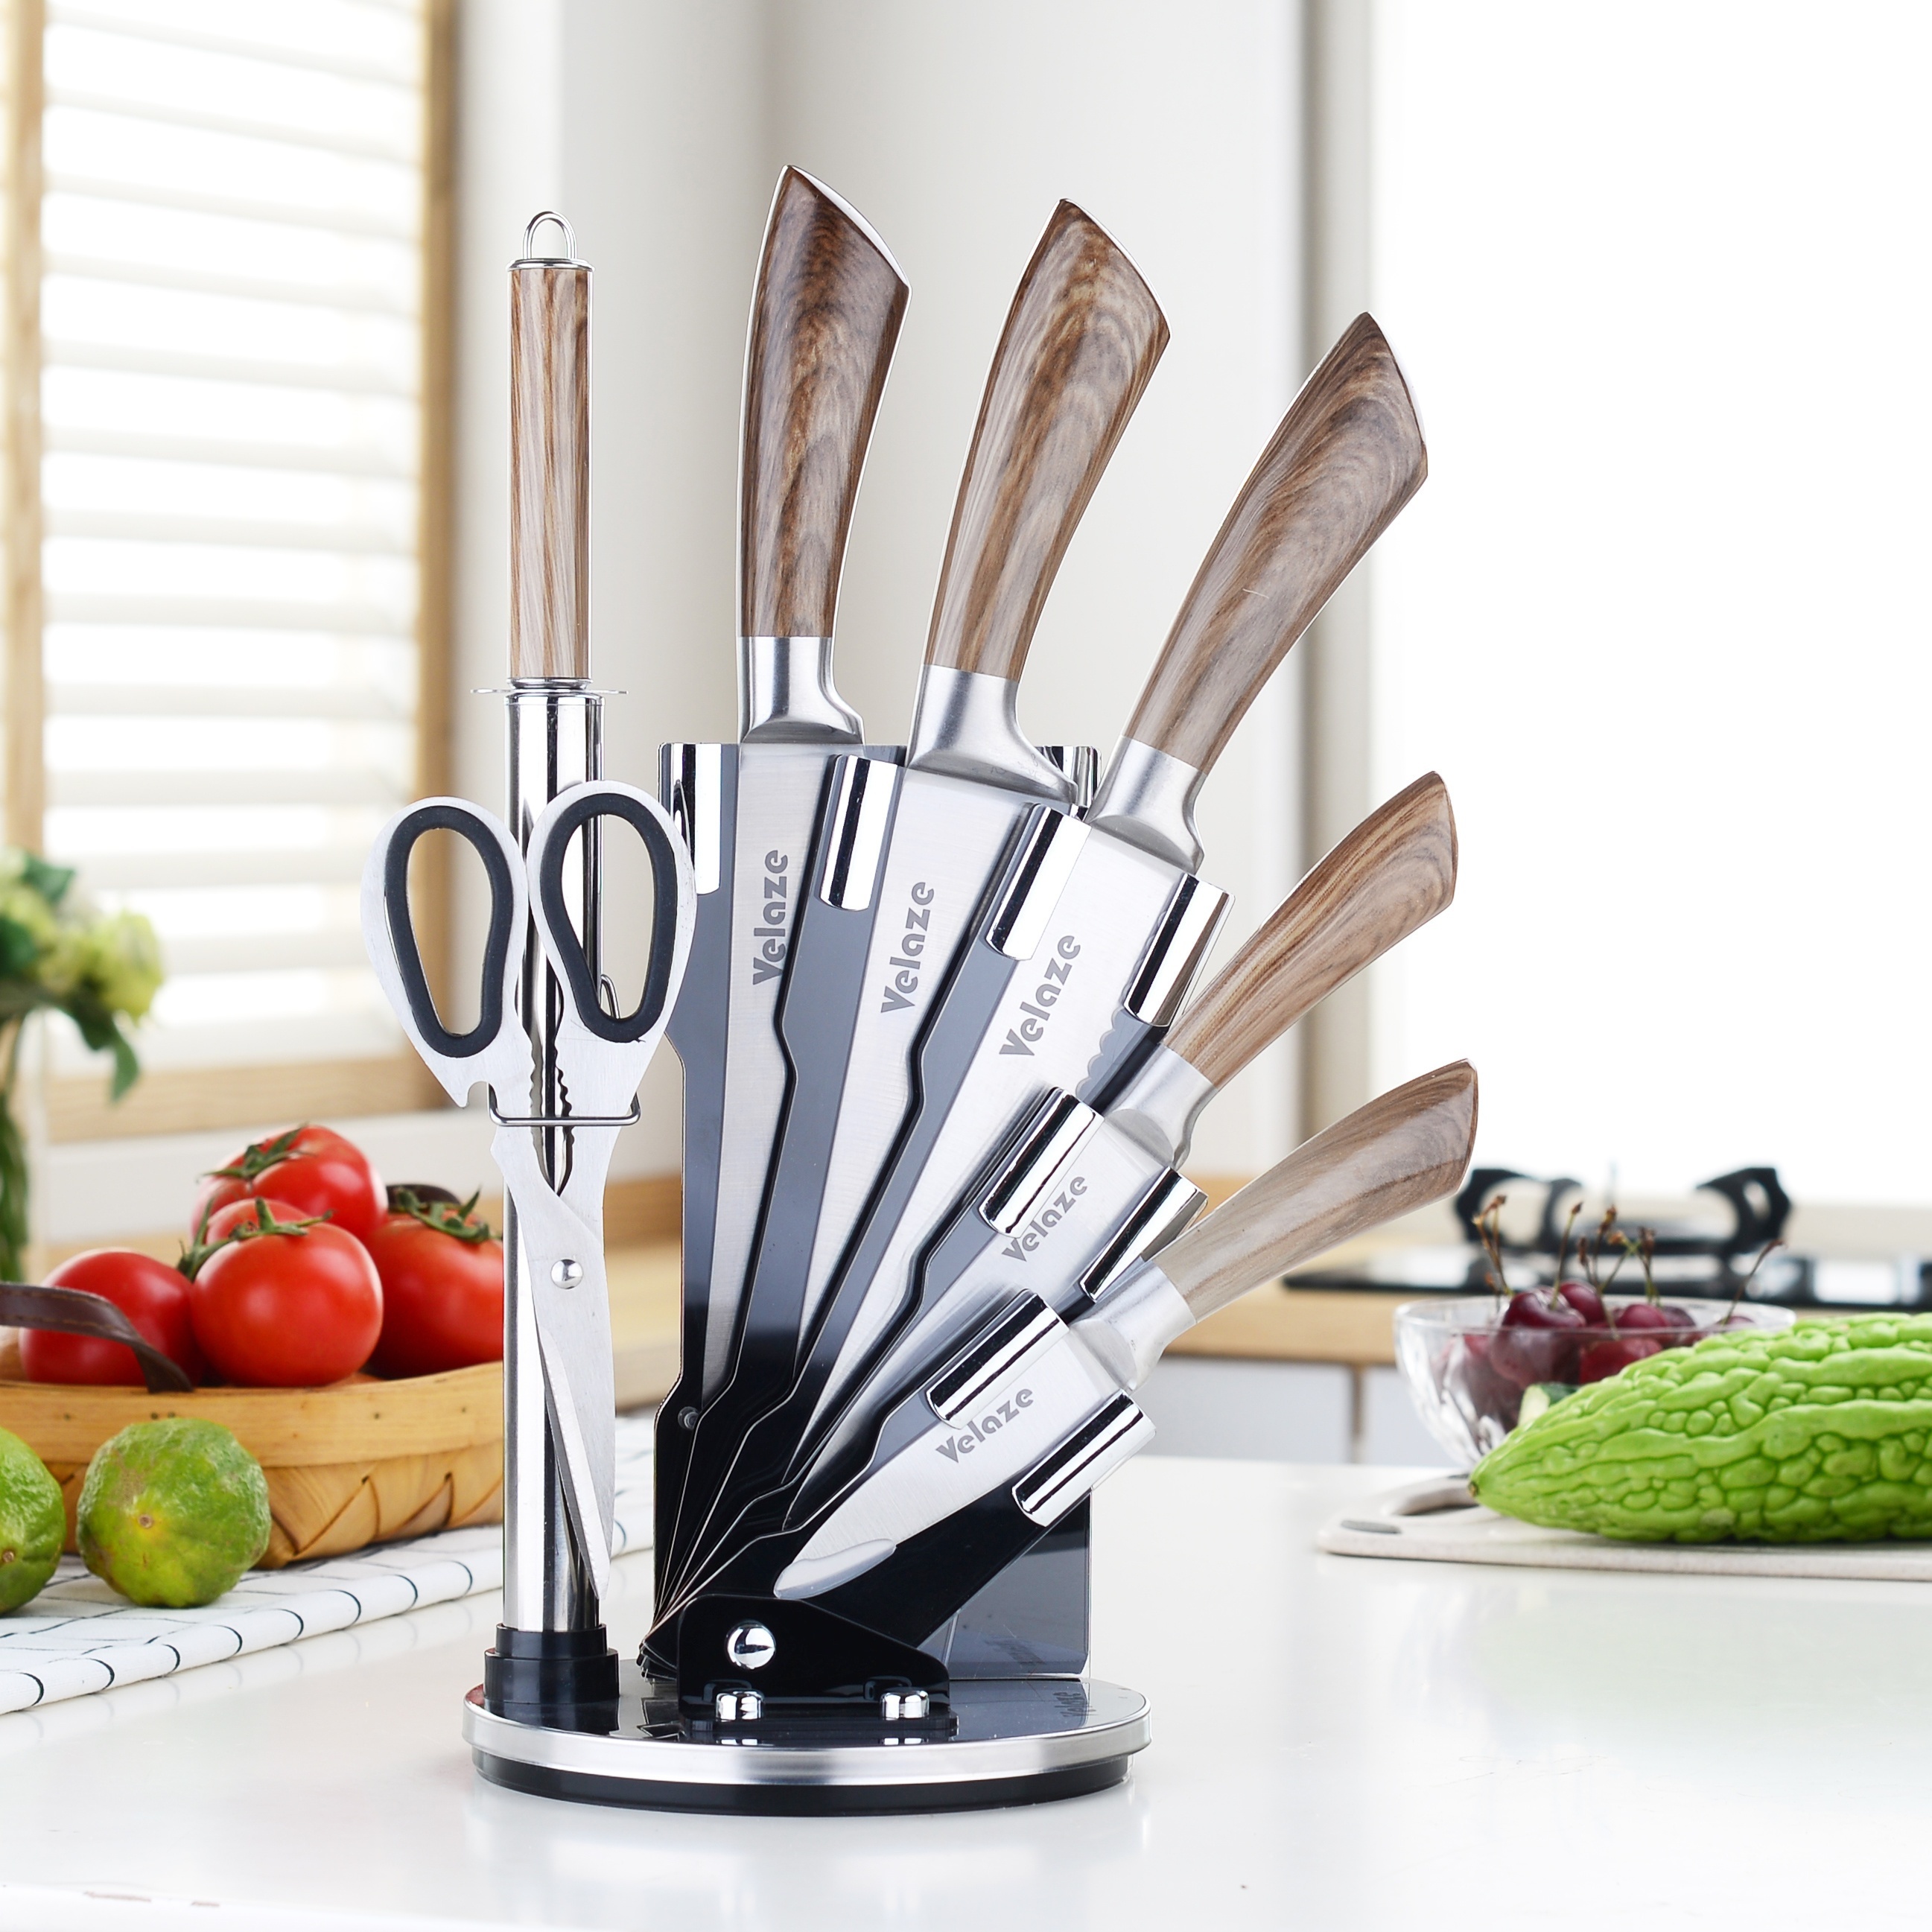 

8pcs/set, Knife Set With Sharpener, Stainless Steel Kitchen Knifes Set With Holder, Includes Chef Knife, Bread Knife, Carving Knife, Utility Knife, Paring Knife, Scissors, And Stand, Kitchen Stuff